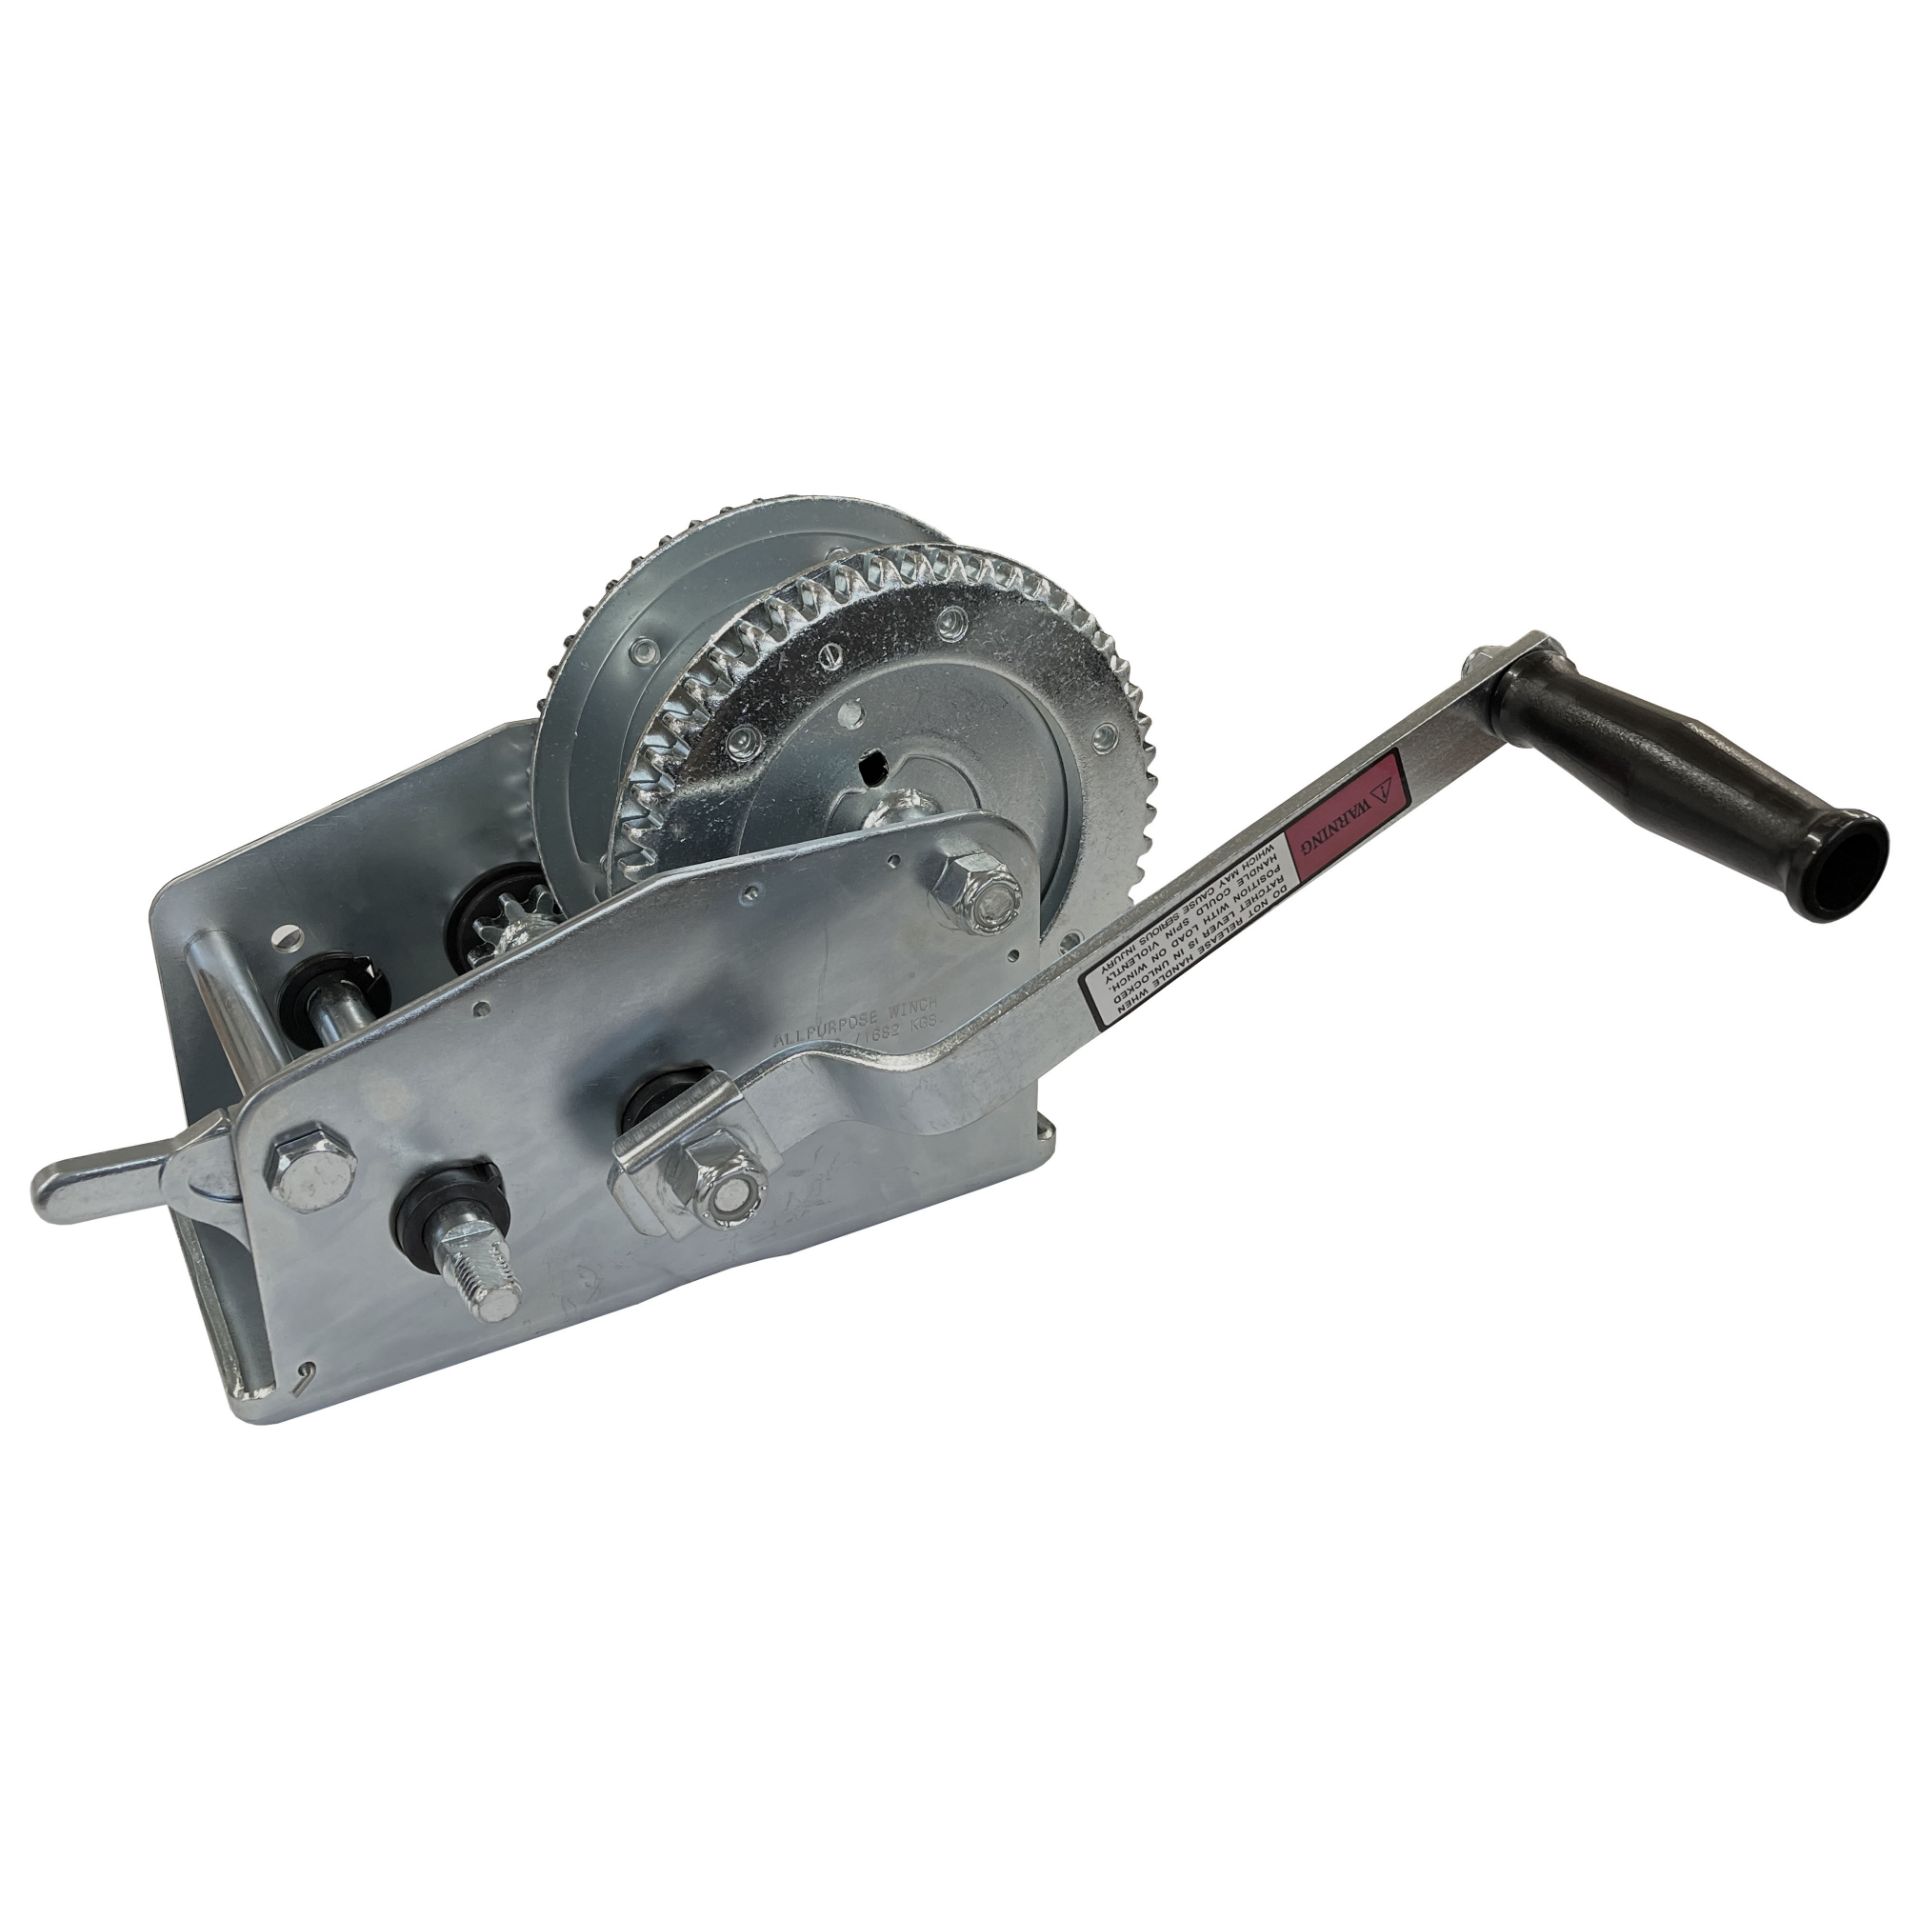 8 X 1200Lbs Duracoat Hand Winch (Not For Lifting) (Hw12D)